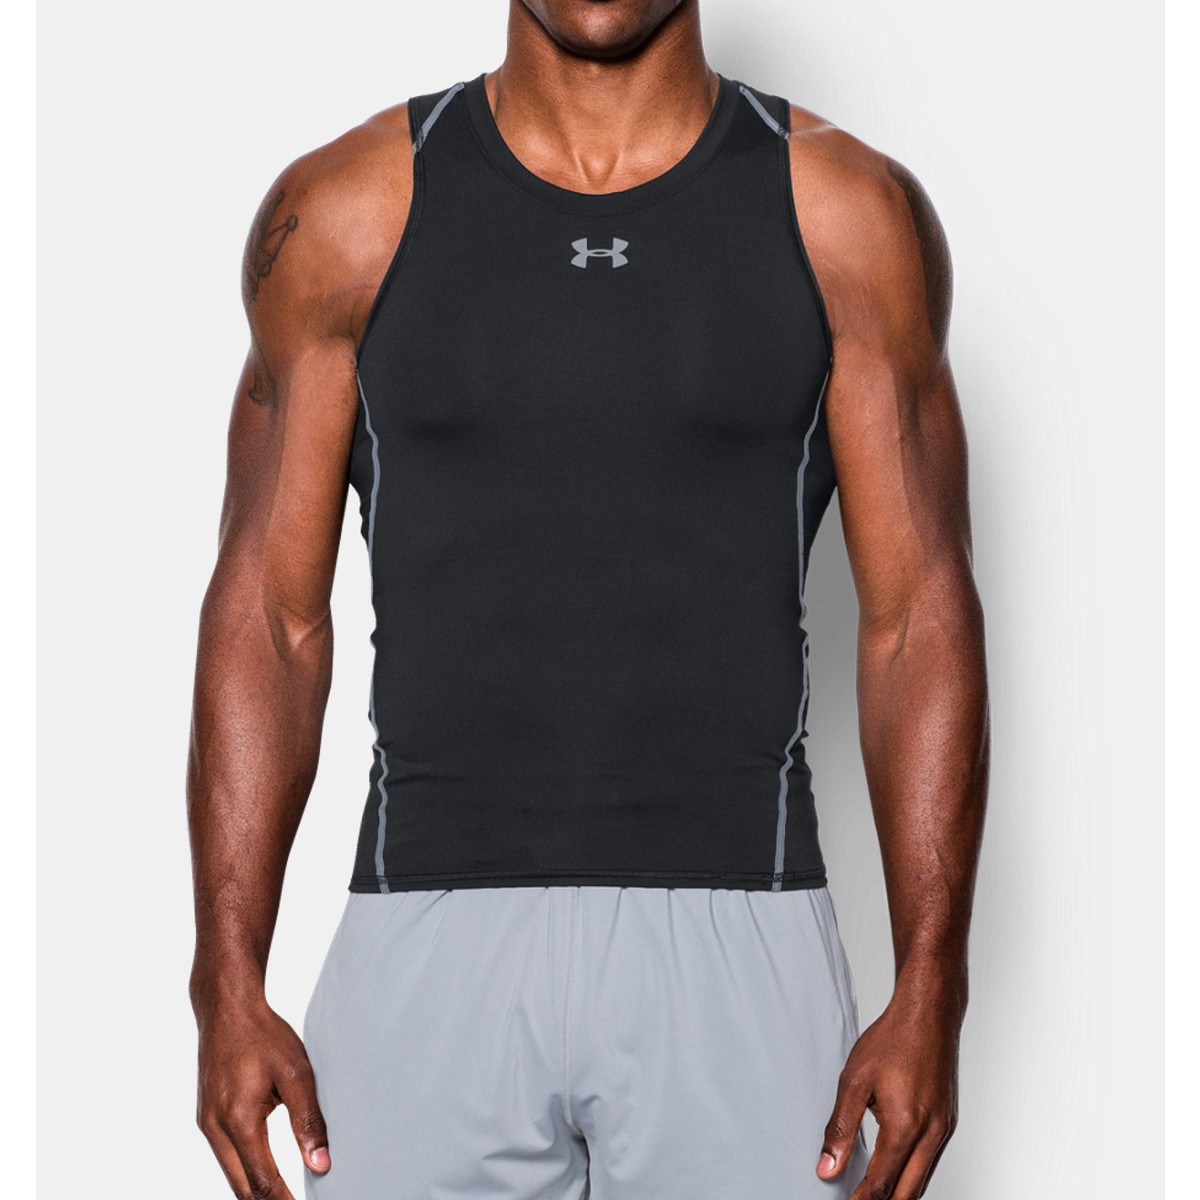 CANOTTA UNDER ARMOUR 1271335 HG ARMOUR TANK NERO MAGLIE UNDER ARMOUR SPORTS  WEAR